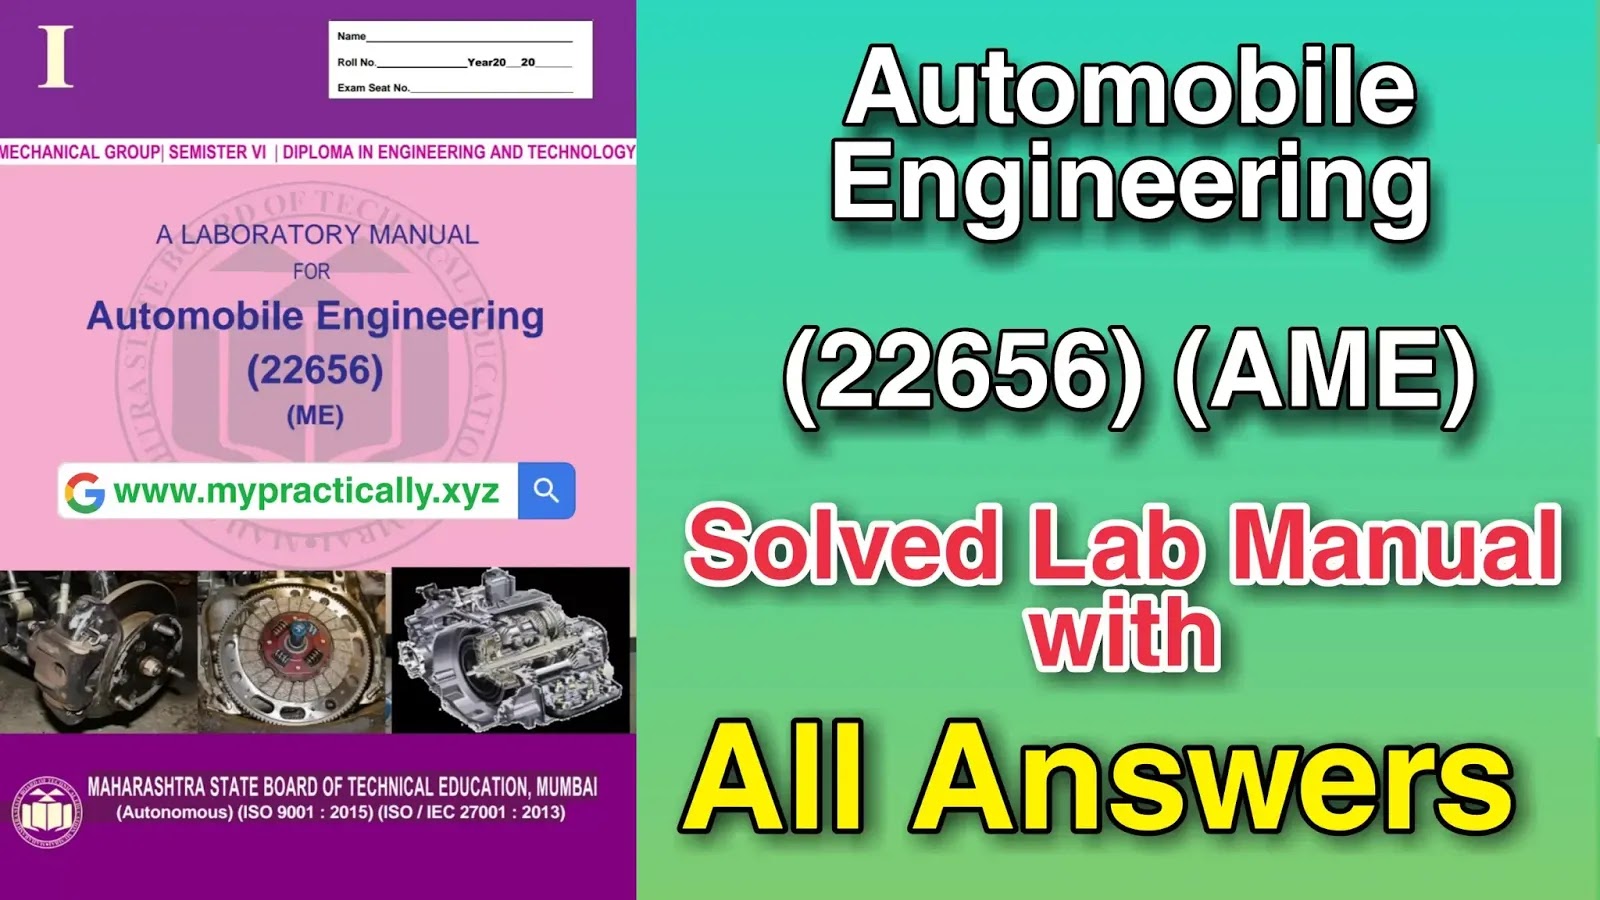 22656 Automobile Engineering Solved Lab Manual Answers | Msbte Lab